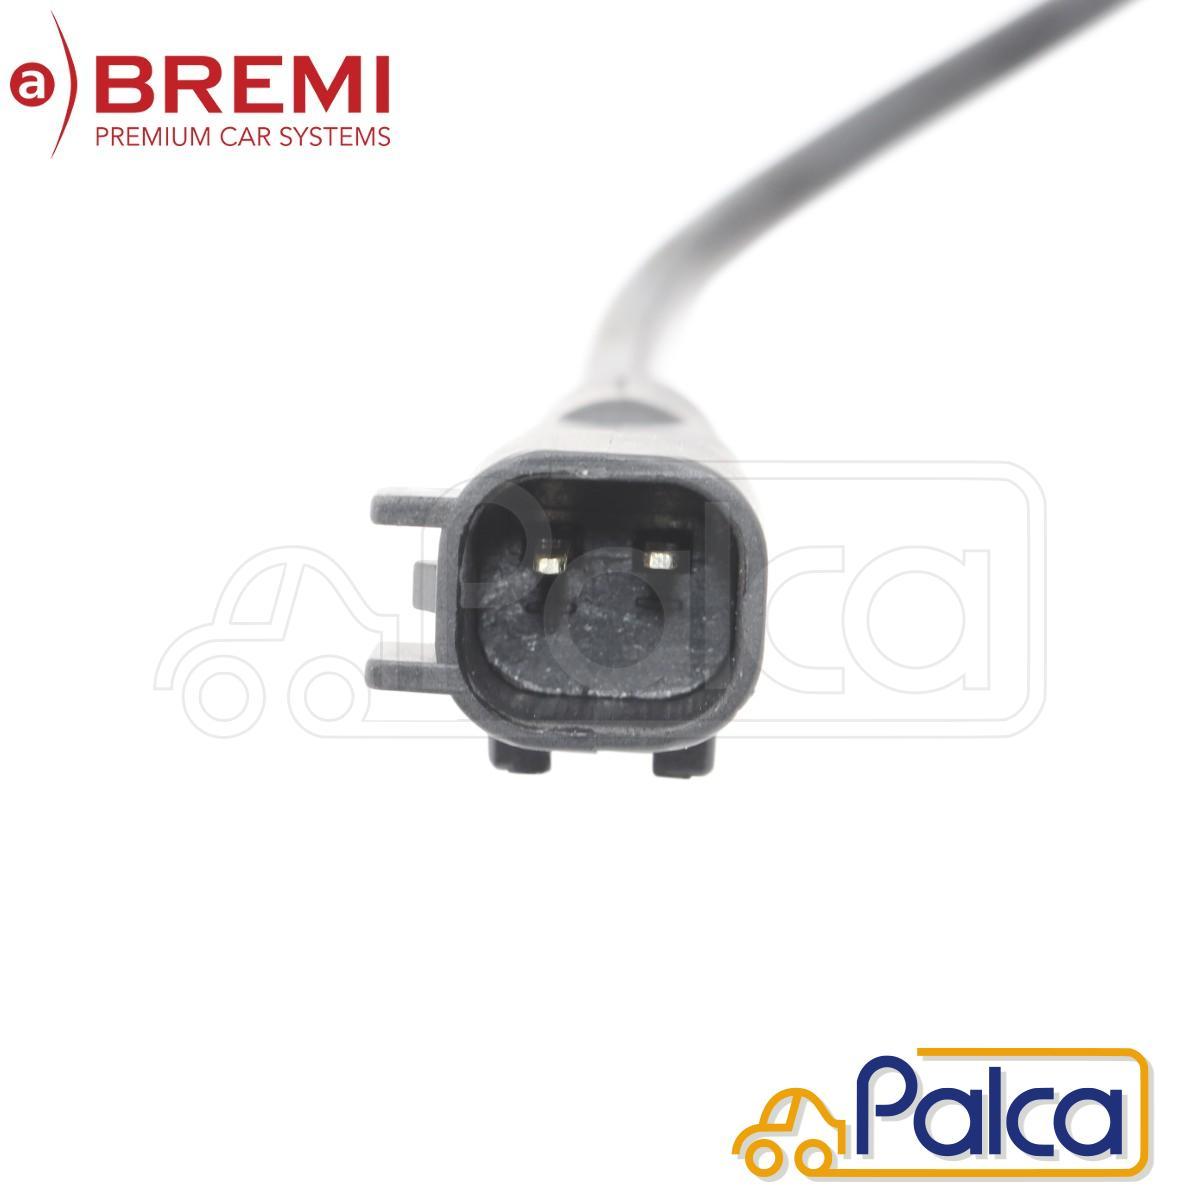  Jeep /JEEP front ABS sensor / speed sensor right |pa Trio to1/MK74 | compass 1/MK49 | BREMI made | 5105572AB